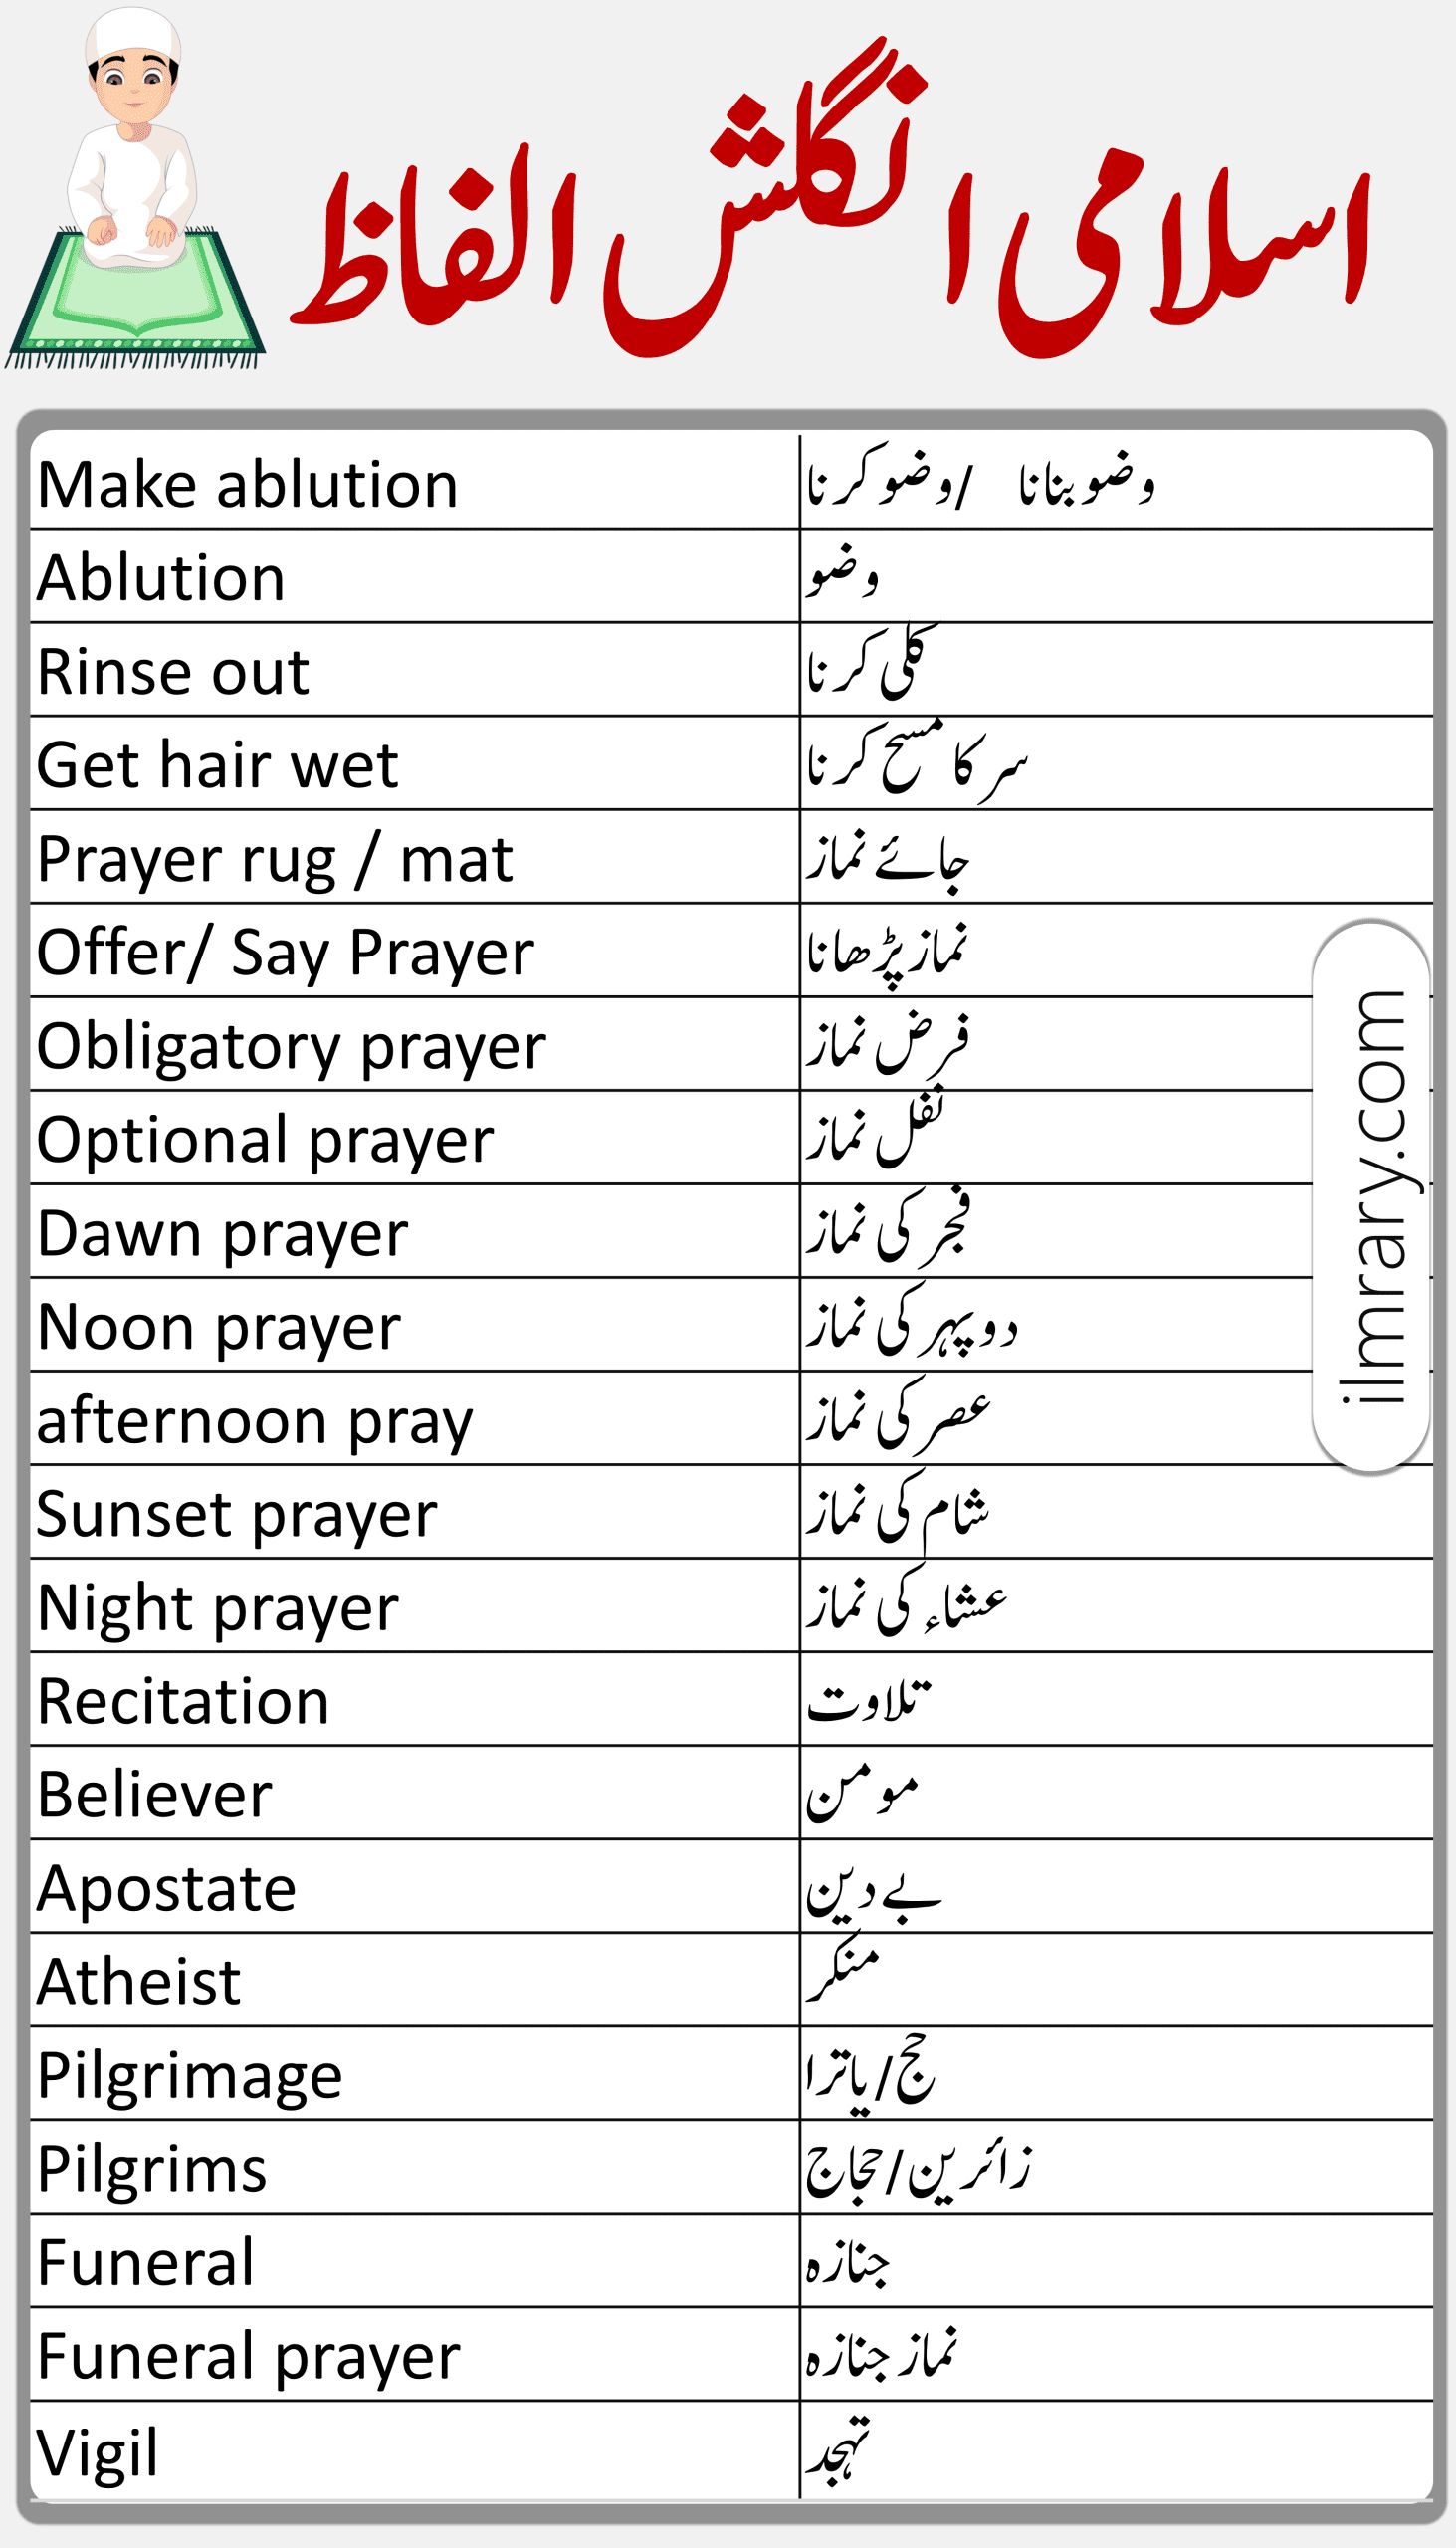 55 Islamic Vocabulary in English with Urdu Meanings-ilmrary